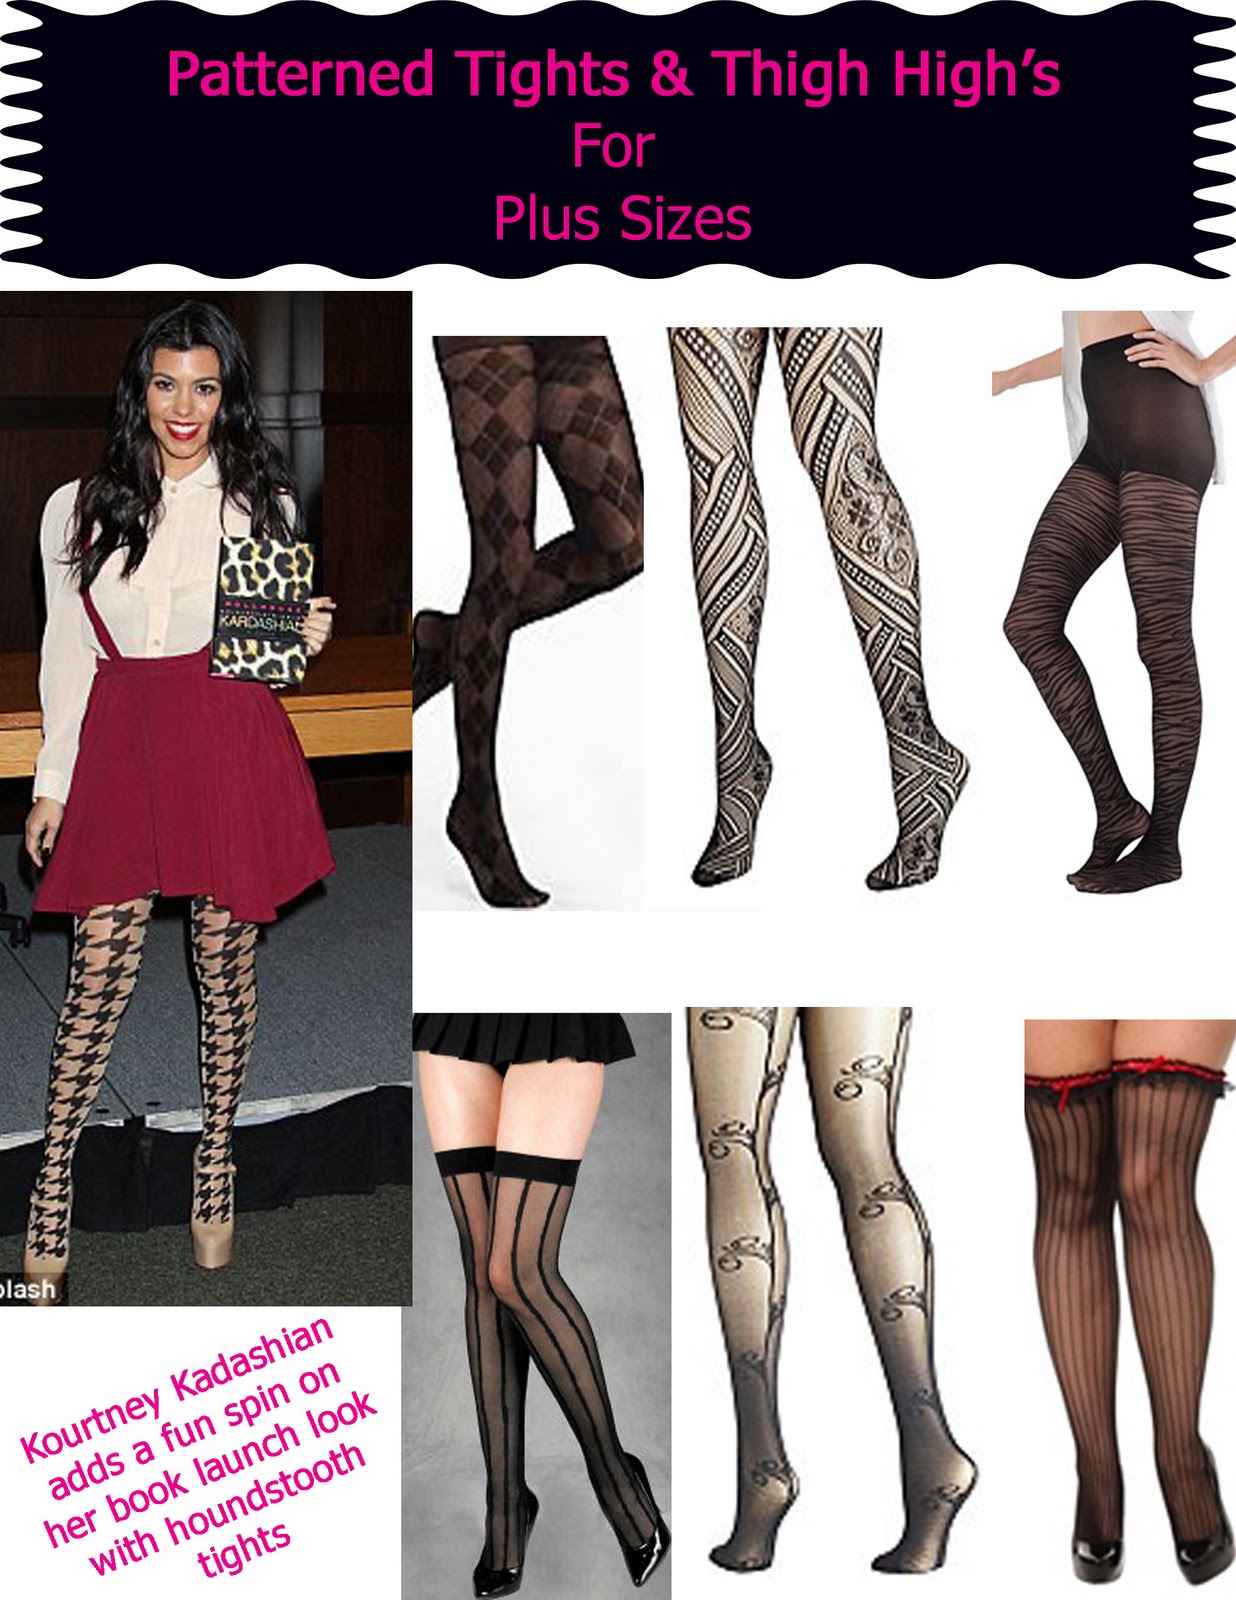 WHERE TO FIND PLUS SIZE PATTERNED TIGHTS AND THIGH HIGH'S